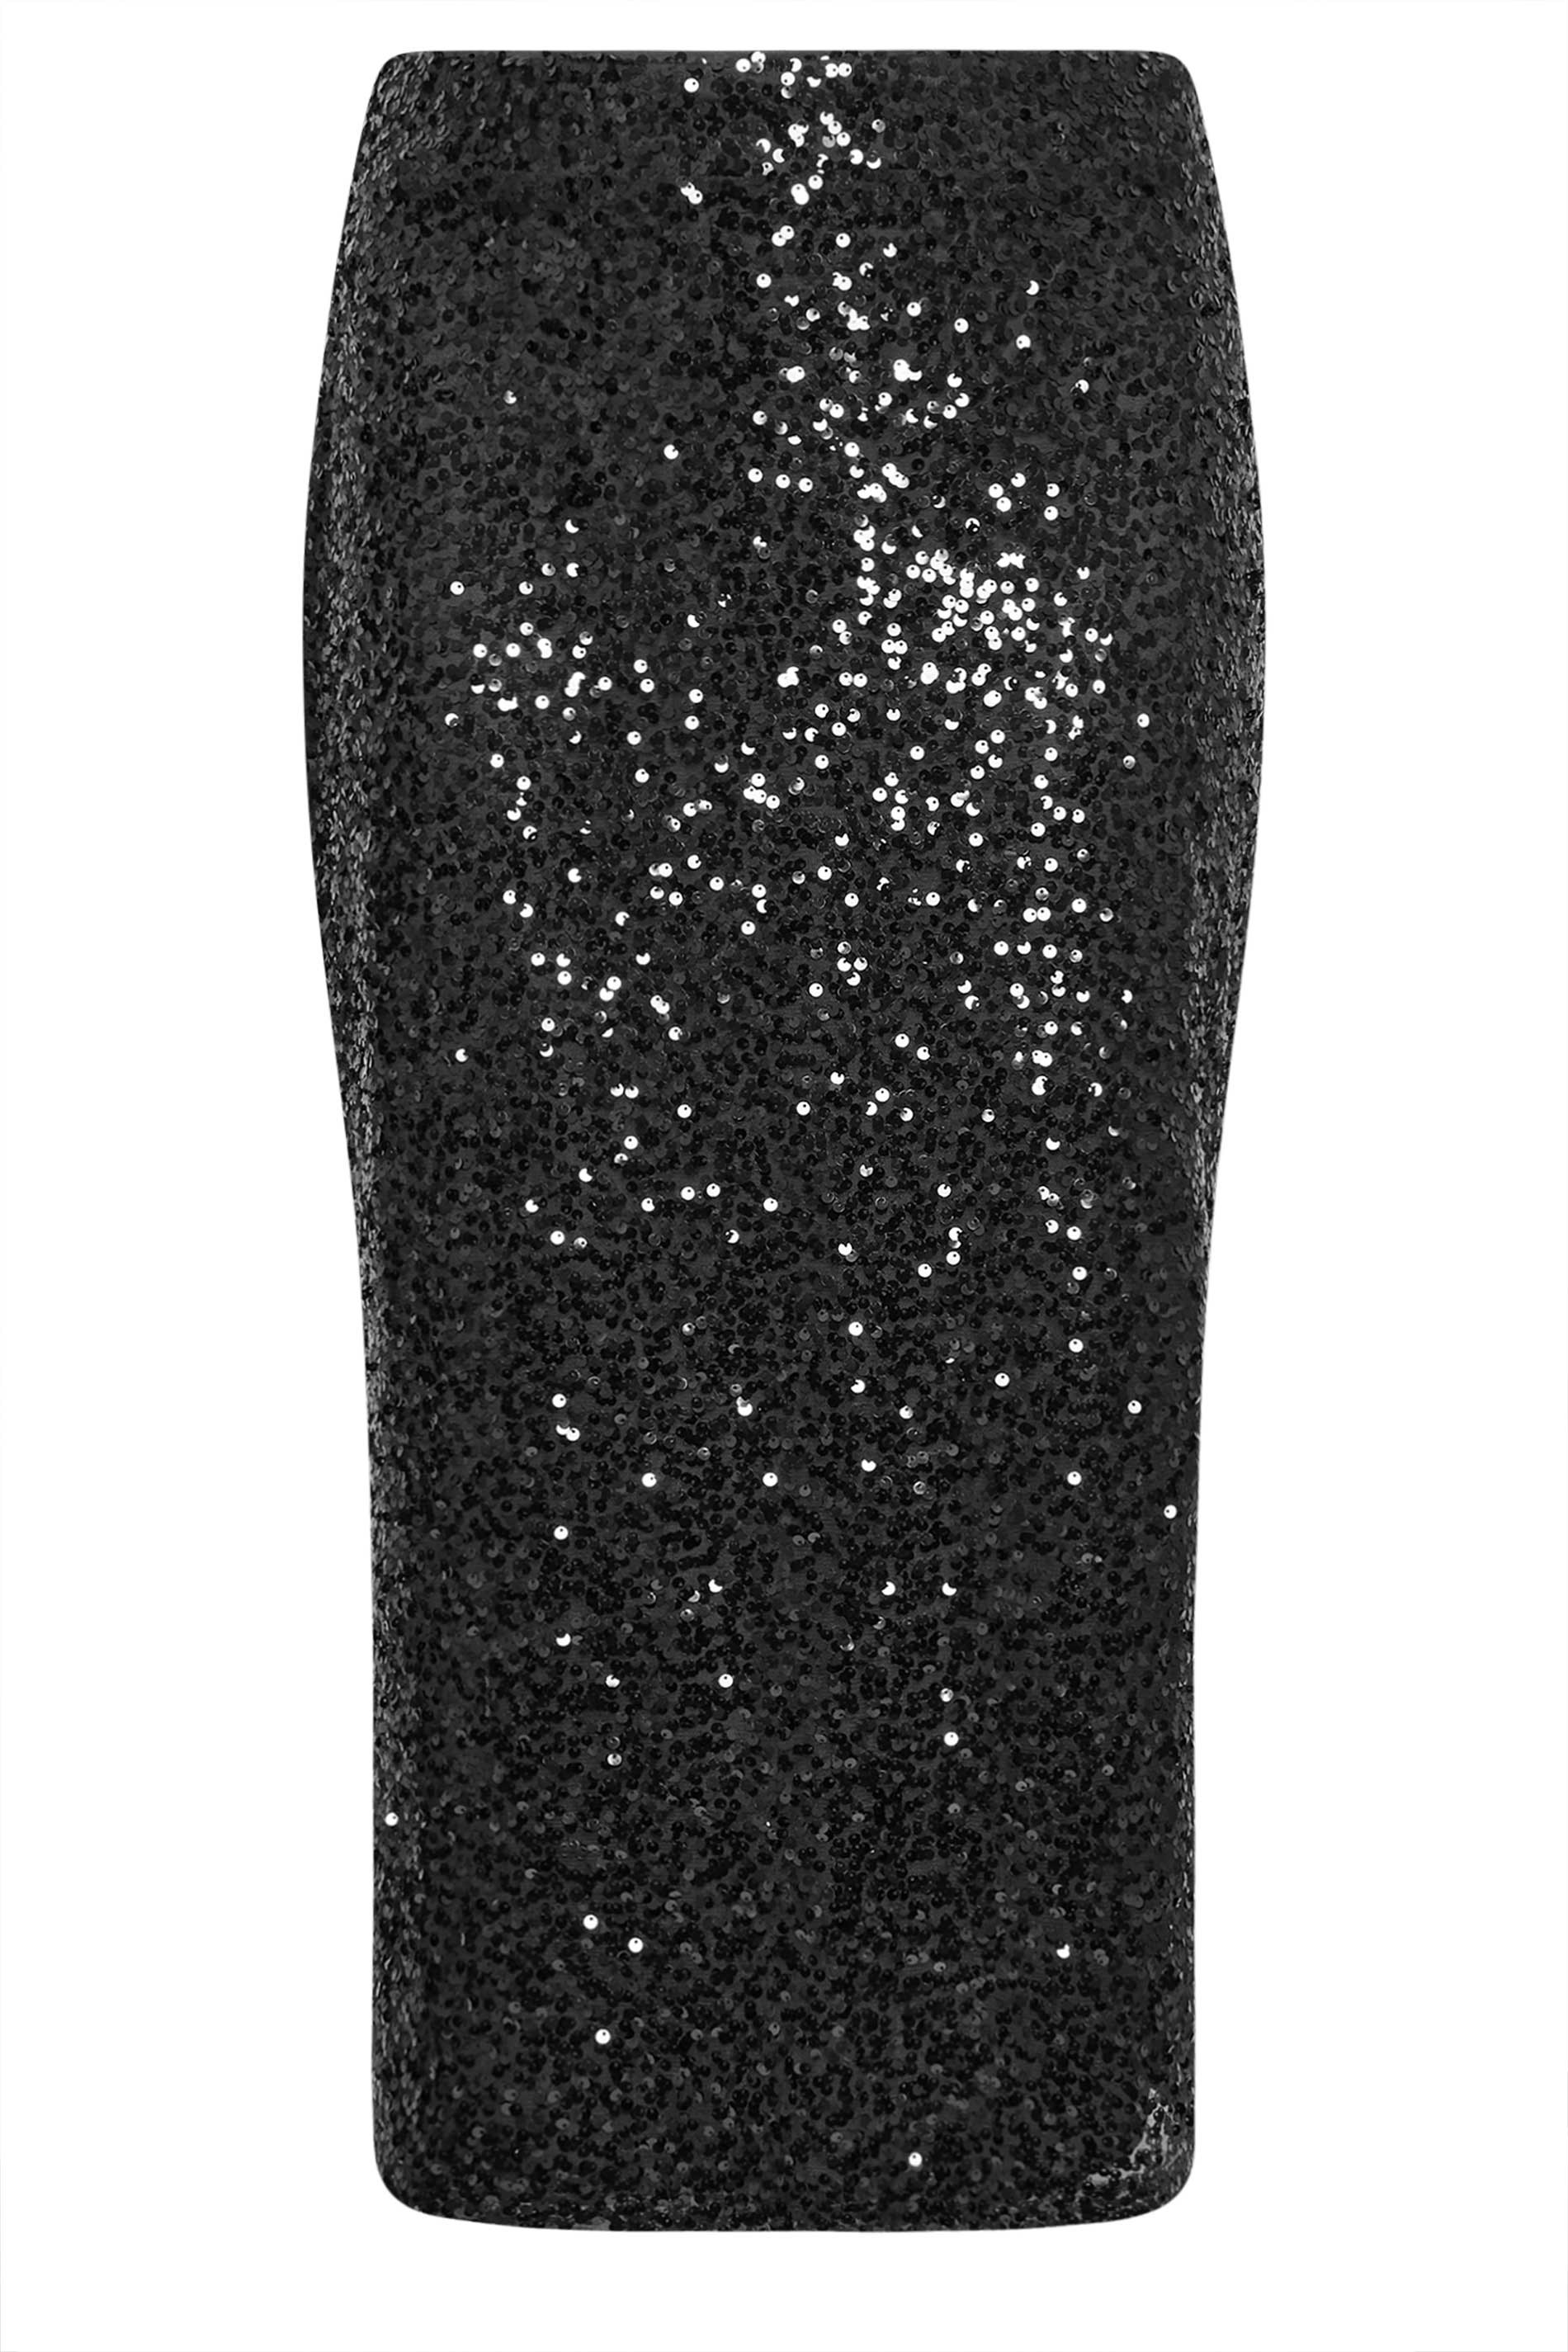 YOURS LONDON Plus Size Black Sequin Embellished Maxi Tube Skirt | Yours ...